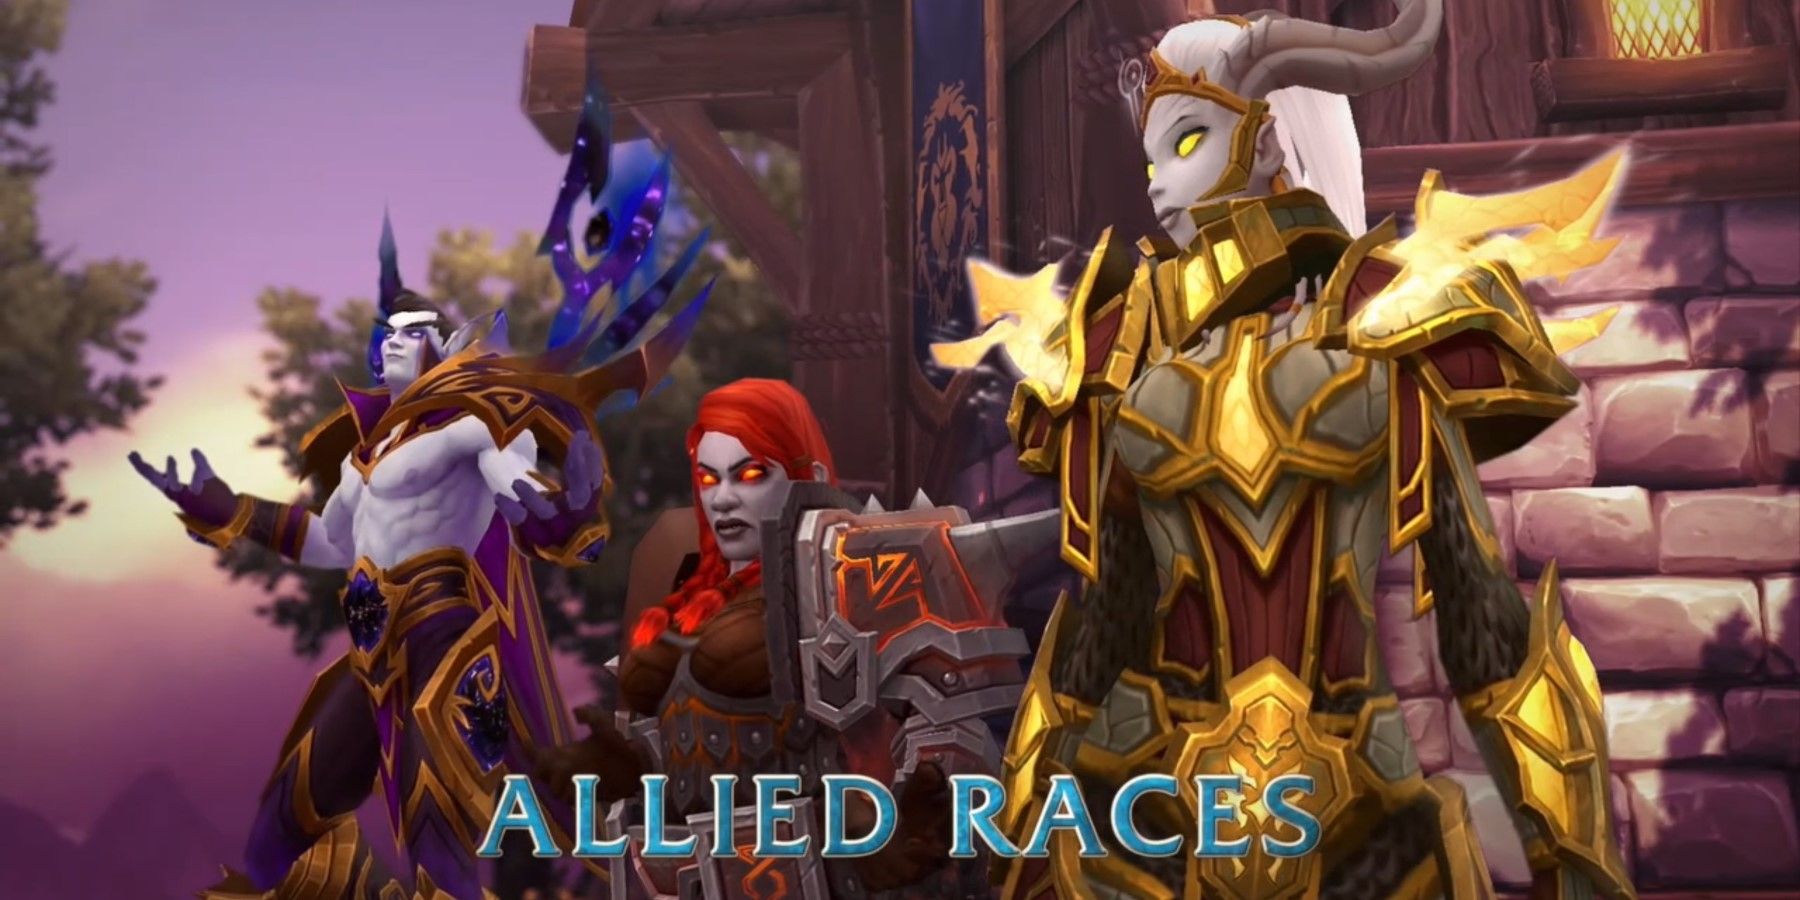 world of warcraft making changes to allied race starting zone